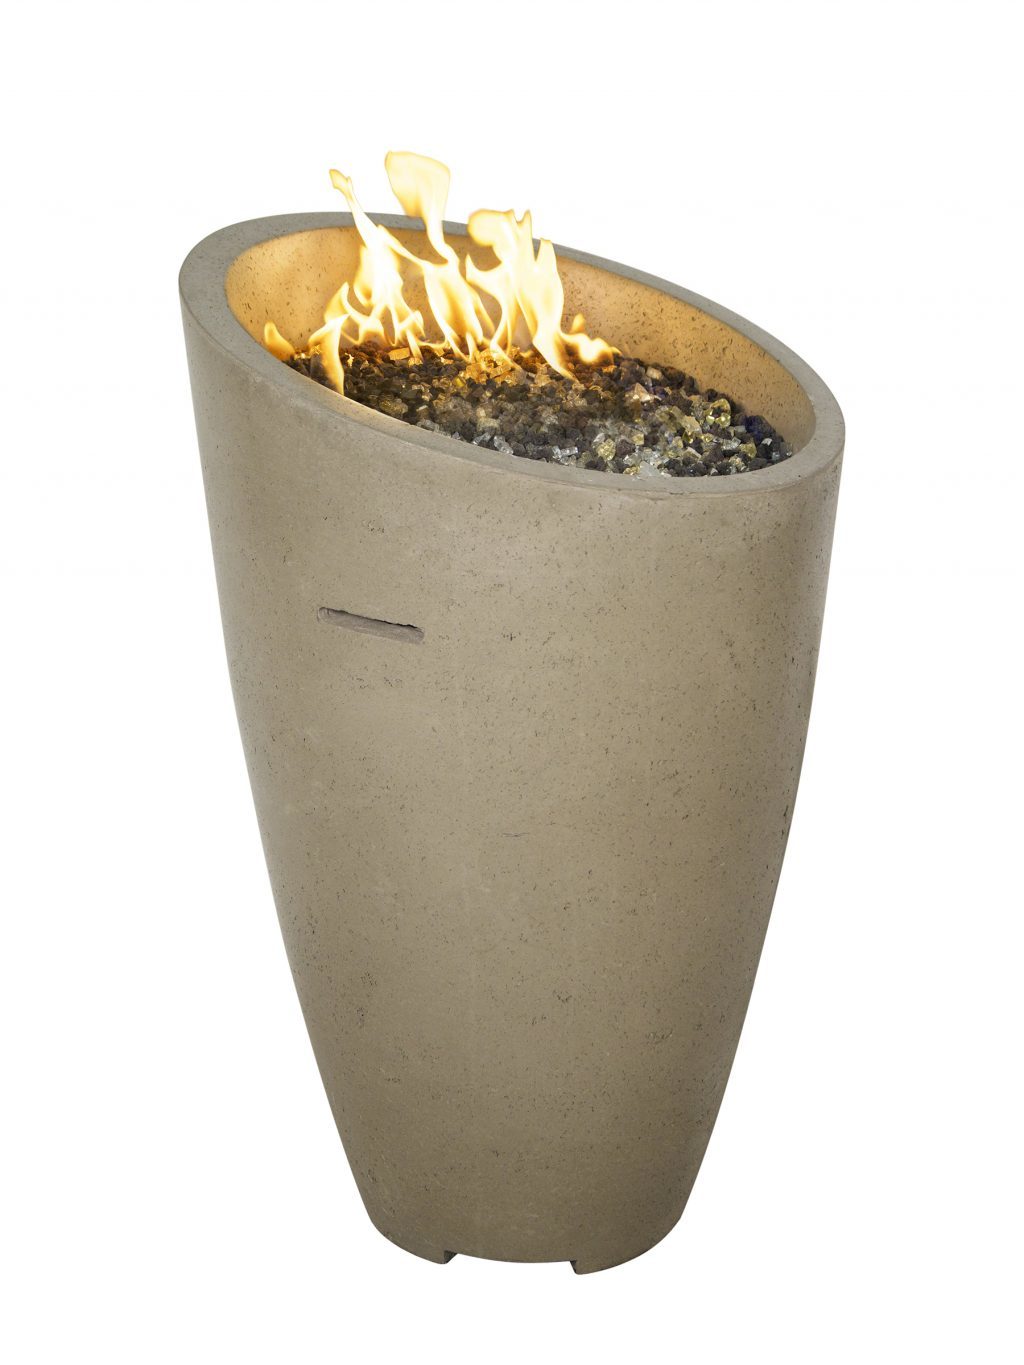 Eclipse fire urn luxury outdoor living by hausers patio